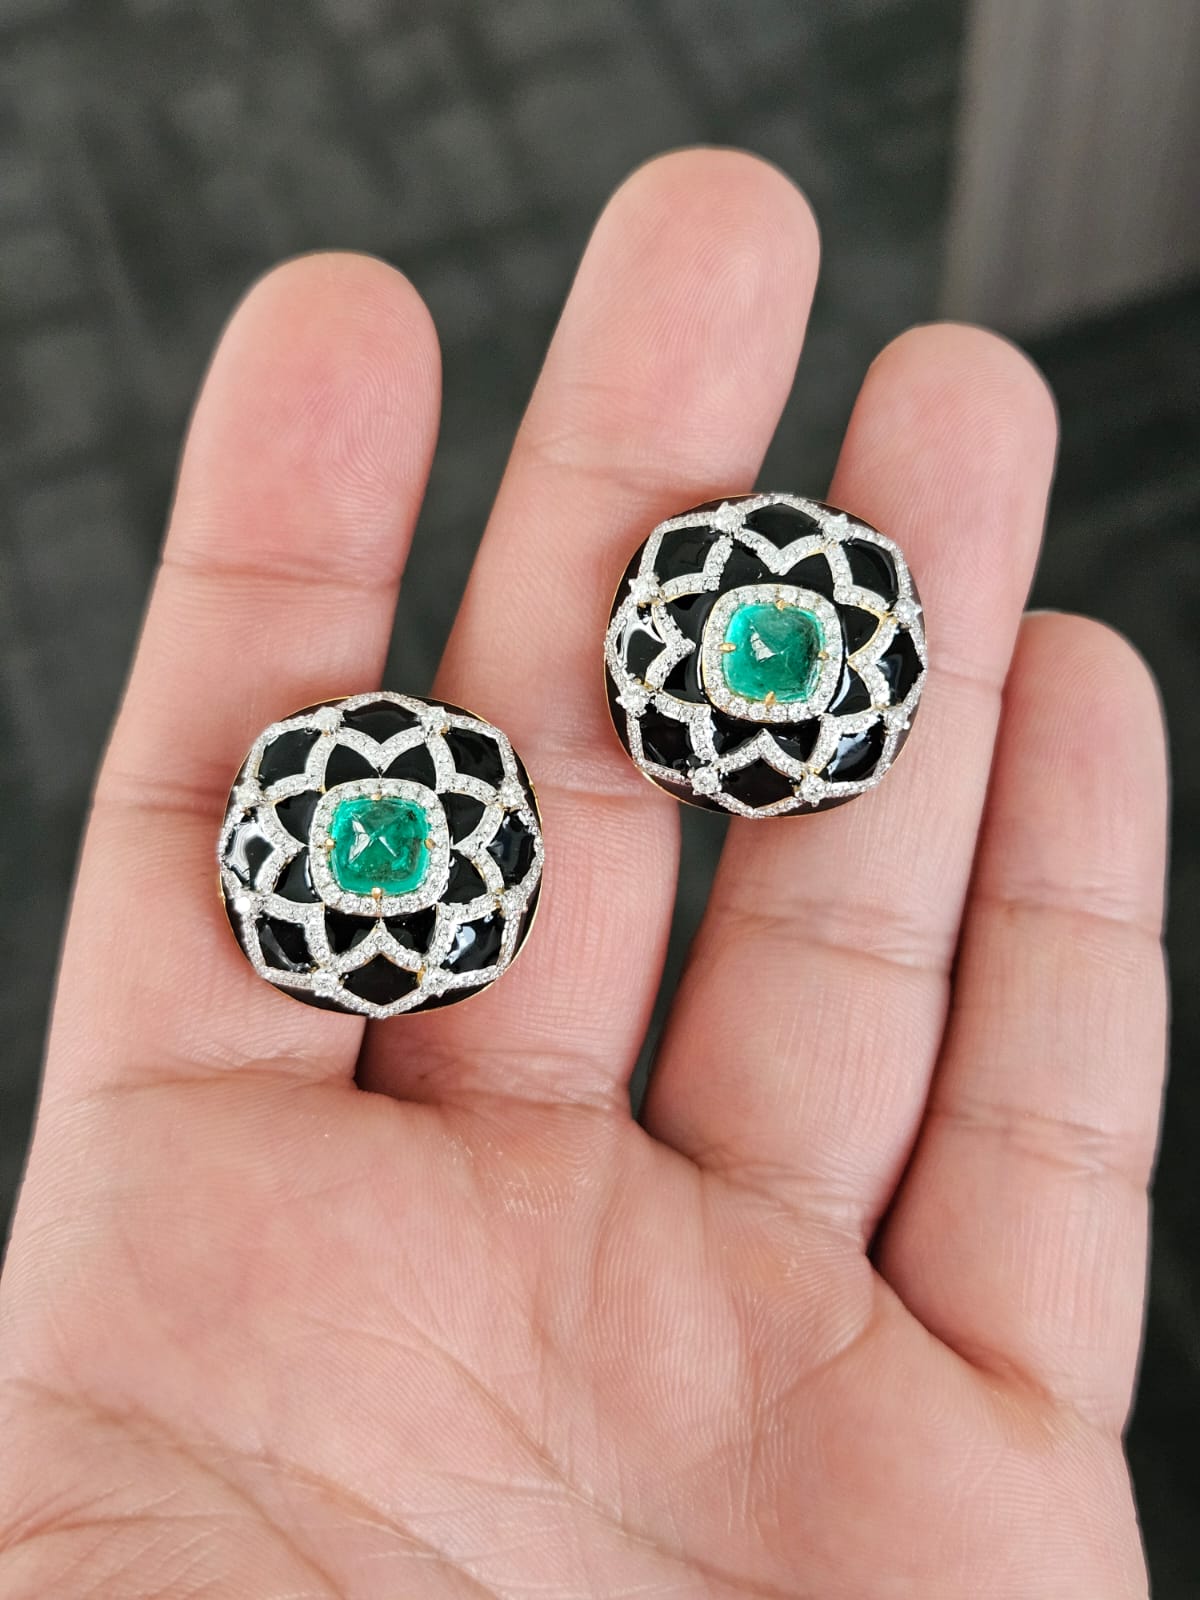 A very gorgeous and beautiful, Art Deco style, Emerald & Black Enamel Stud Earrings set in 18K Yellow Gold & Diamonds. The weight of the Emerald sugarloafs is 3.12 carats. The Emeralds are completely natural, without any treatment and are of